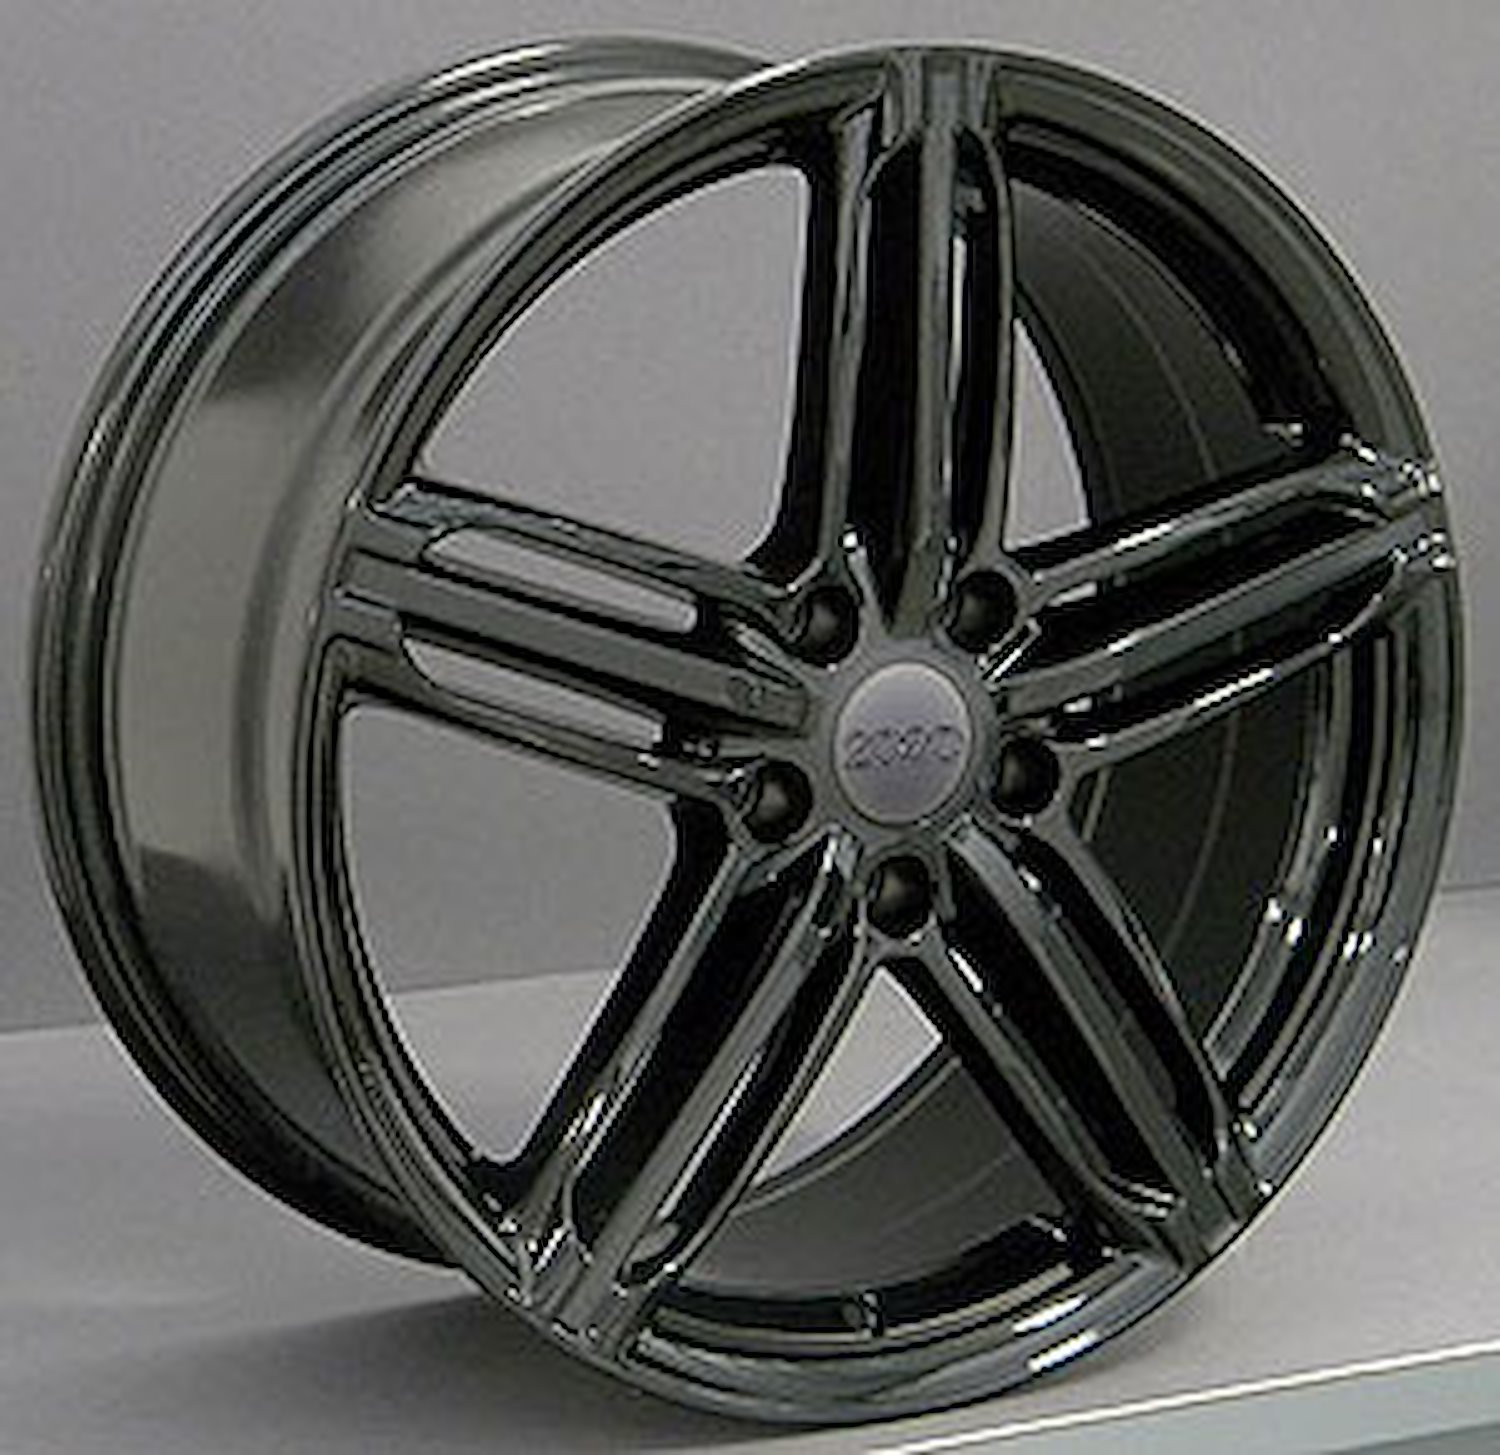 RS6 Style Wheel Size: 18" x 8" Bolt Pattern: 5 x 112 Rear Spacing: 6.27" Offset: +45mm